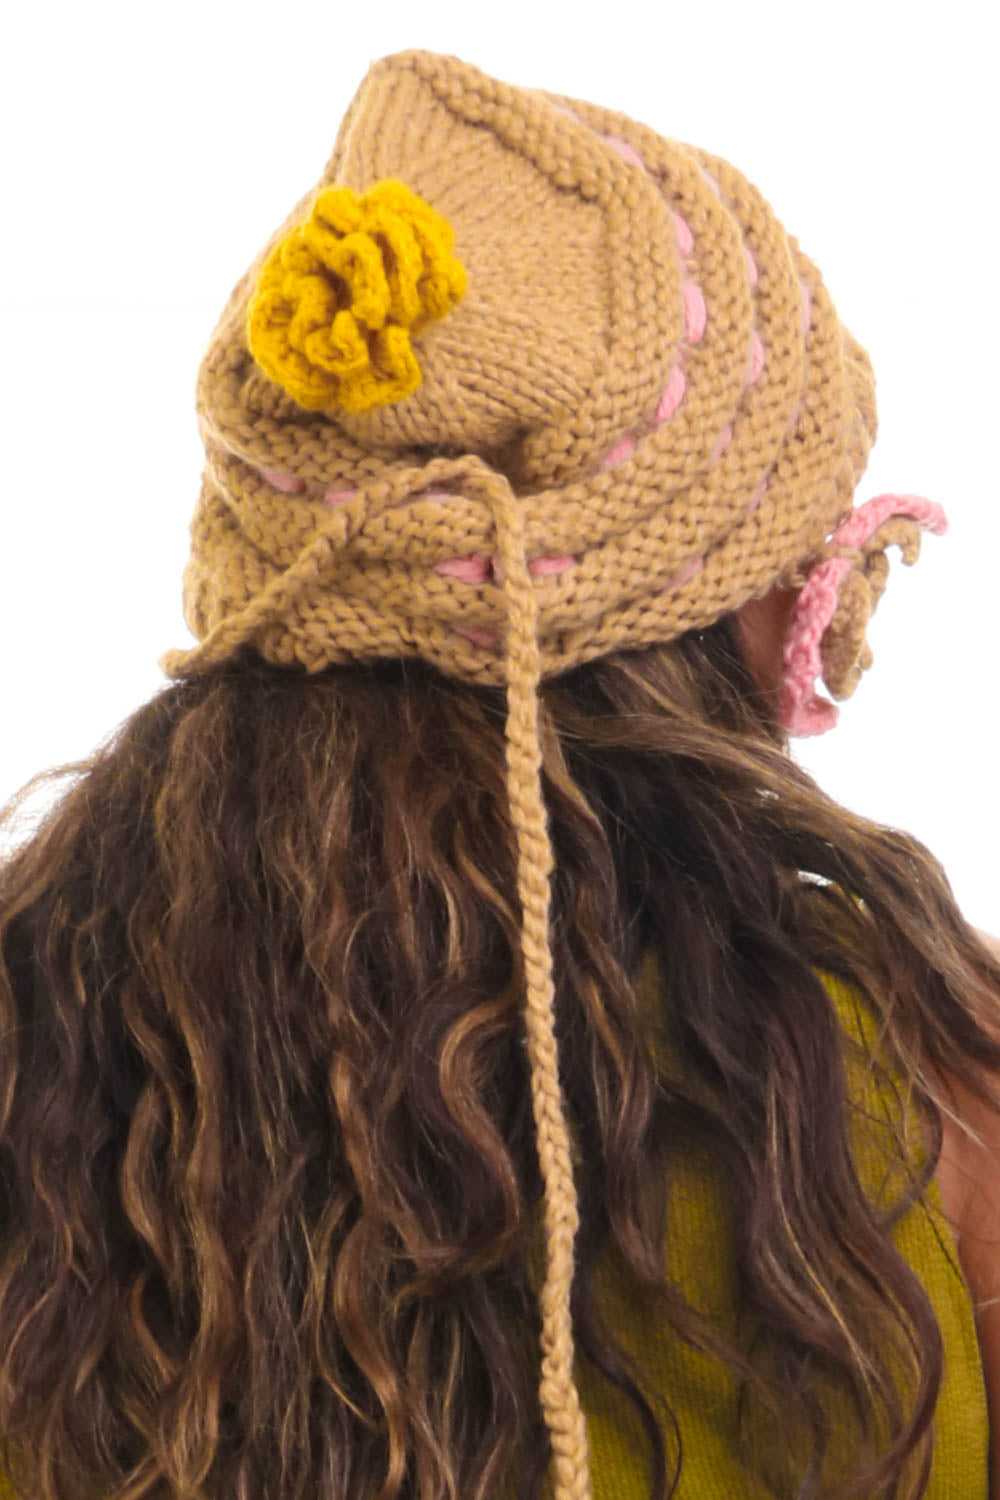 Vintage Flower Power Knitted Beanie - image 6